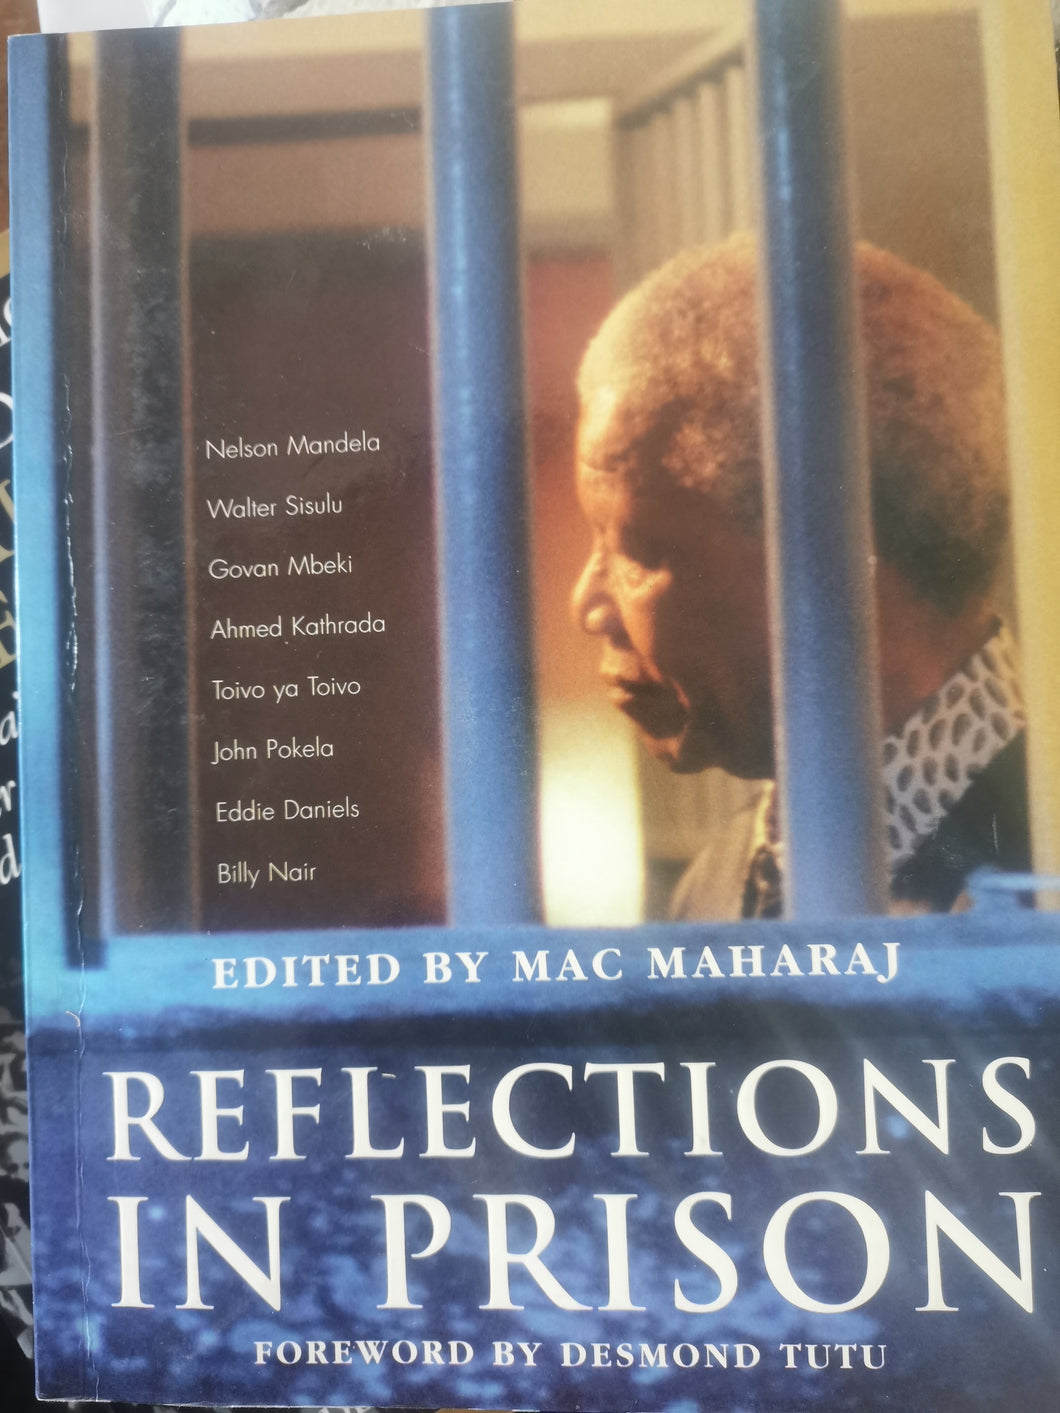 Reflections in Prison - Edited by Mac Maharaj